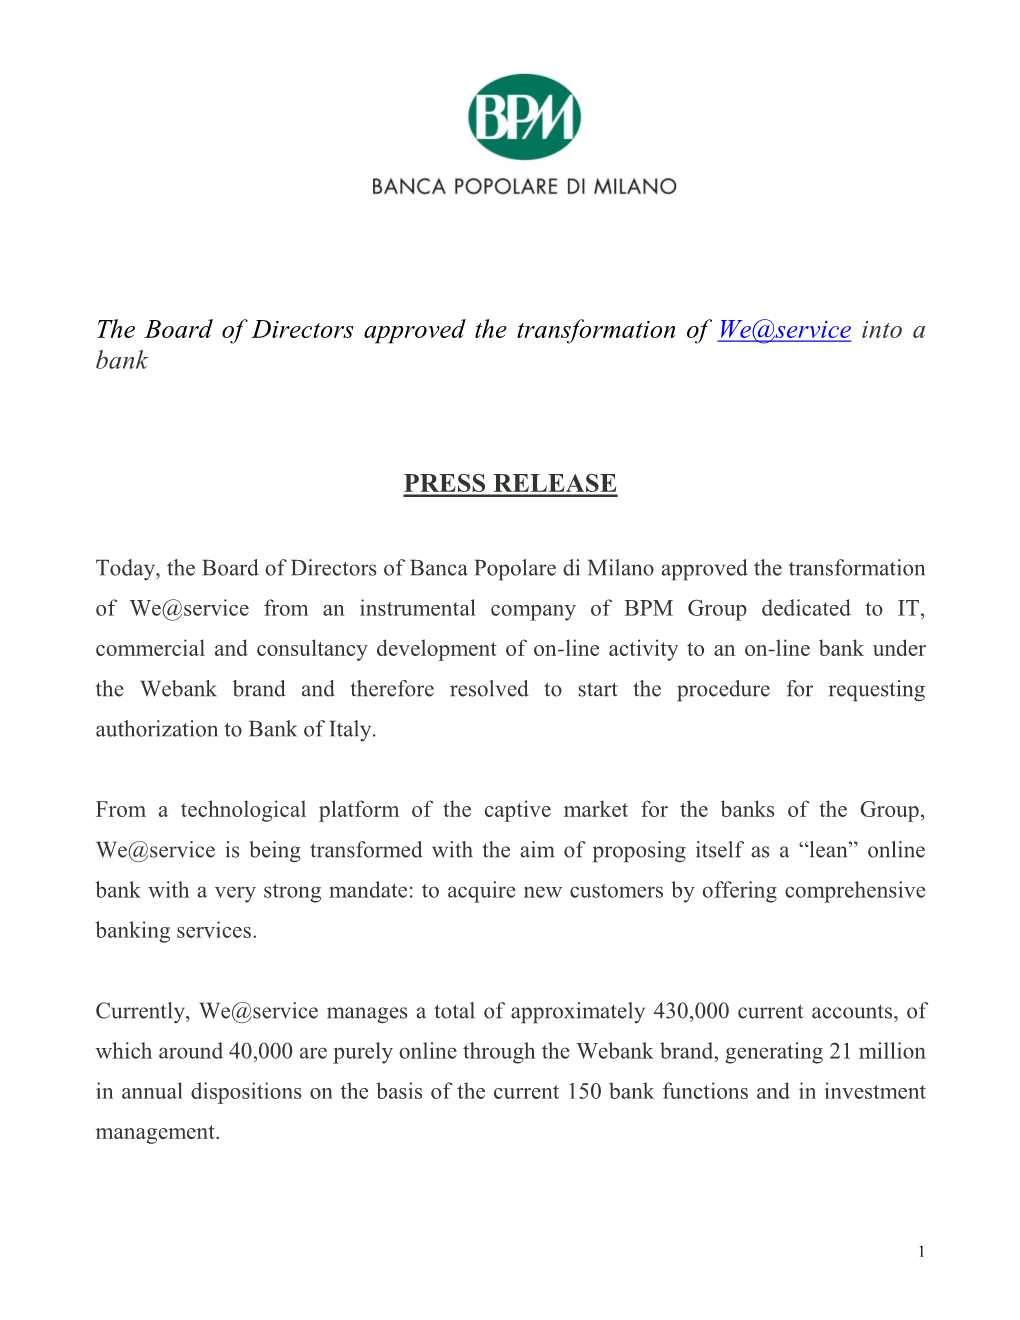 The Board of Directors Approved the Transformation of We@Service Into a Bank